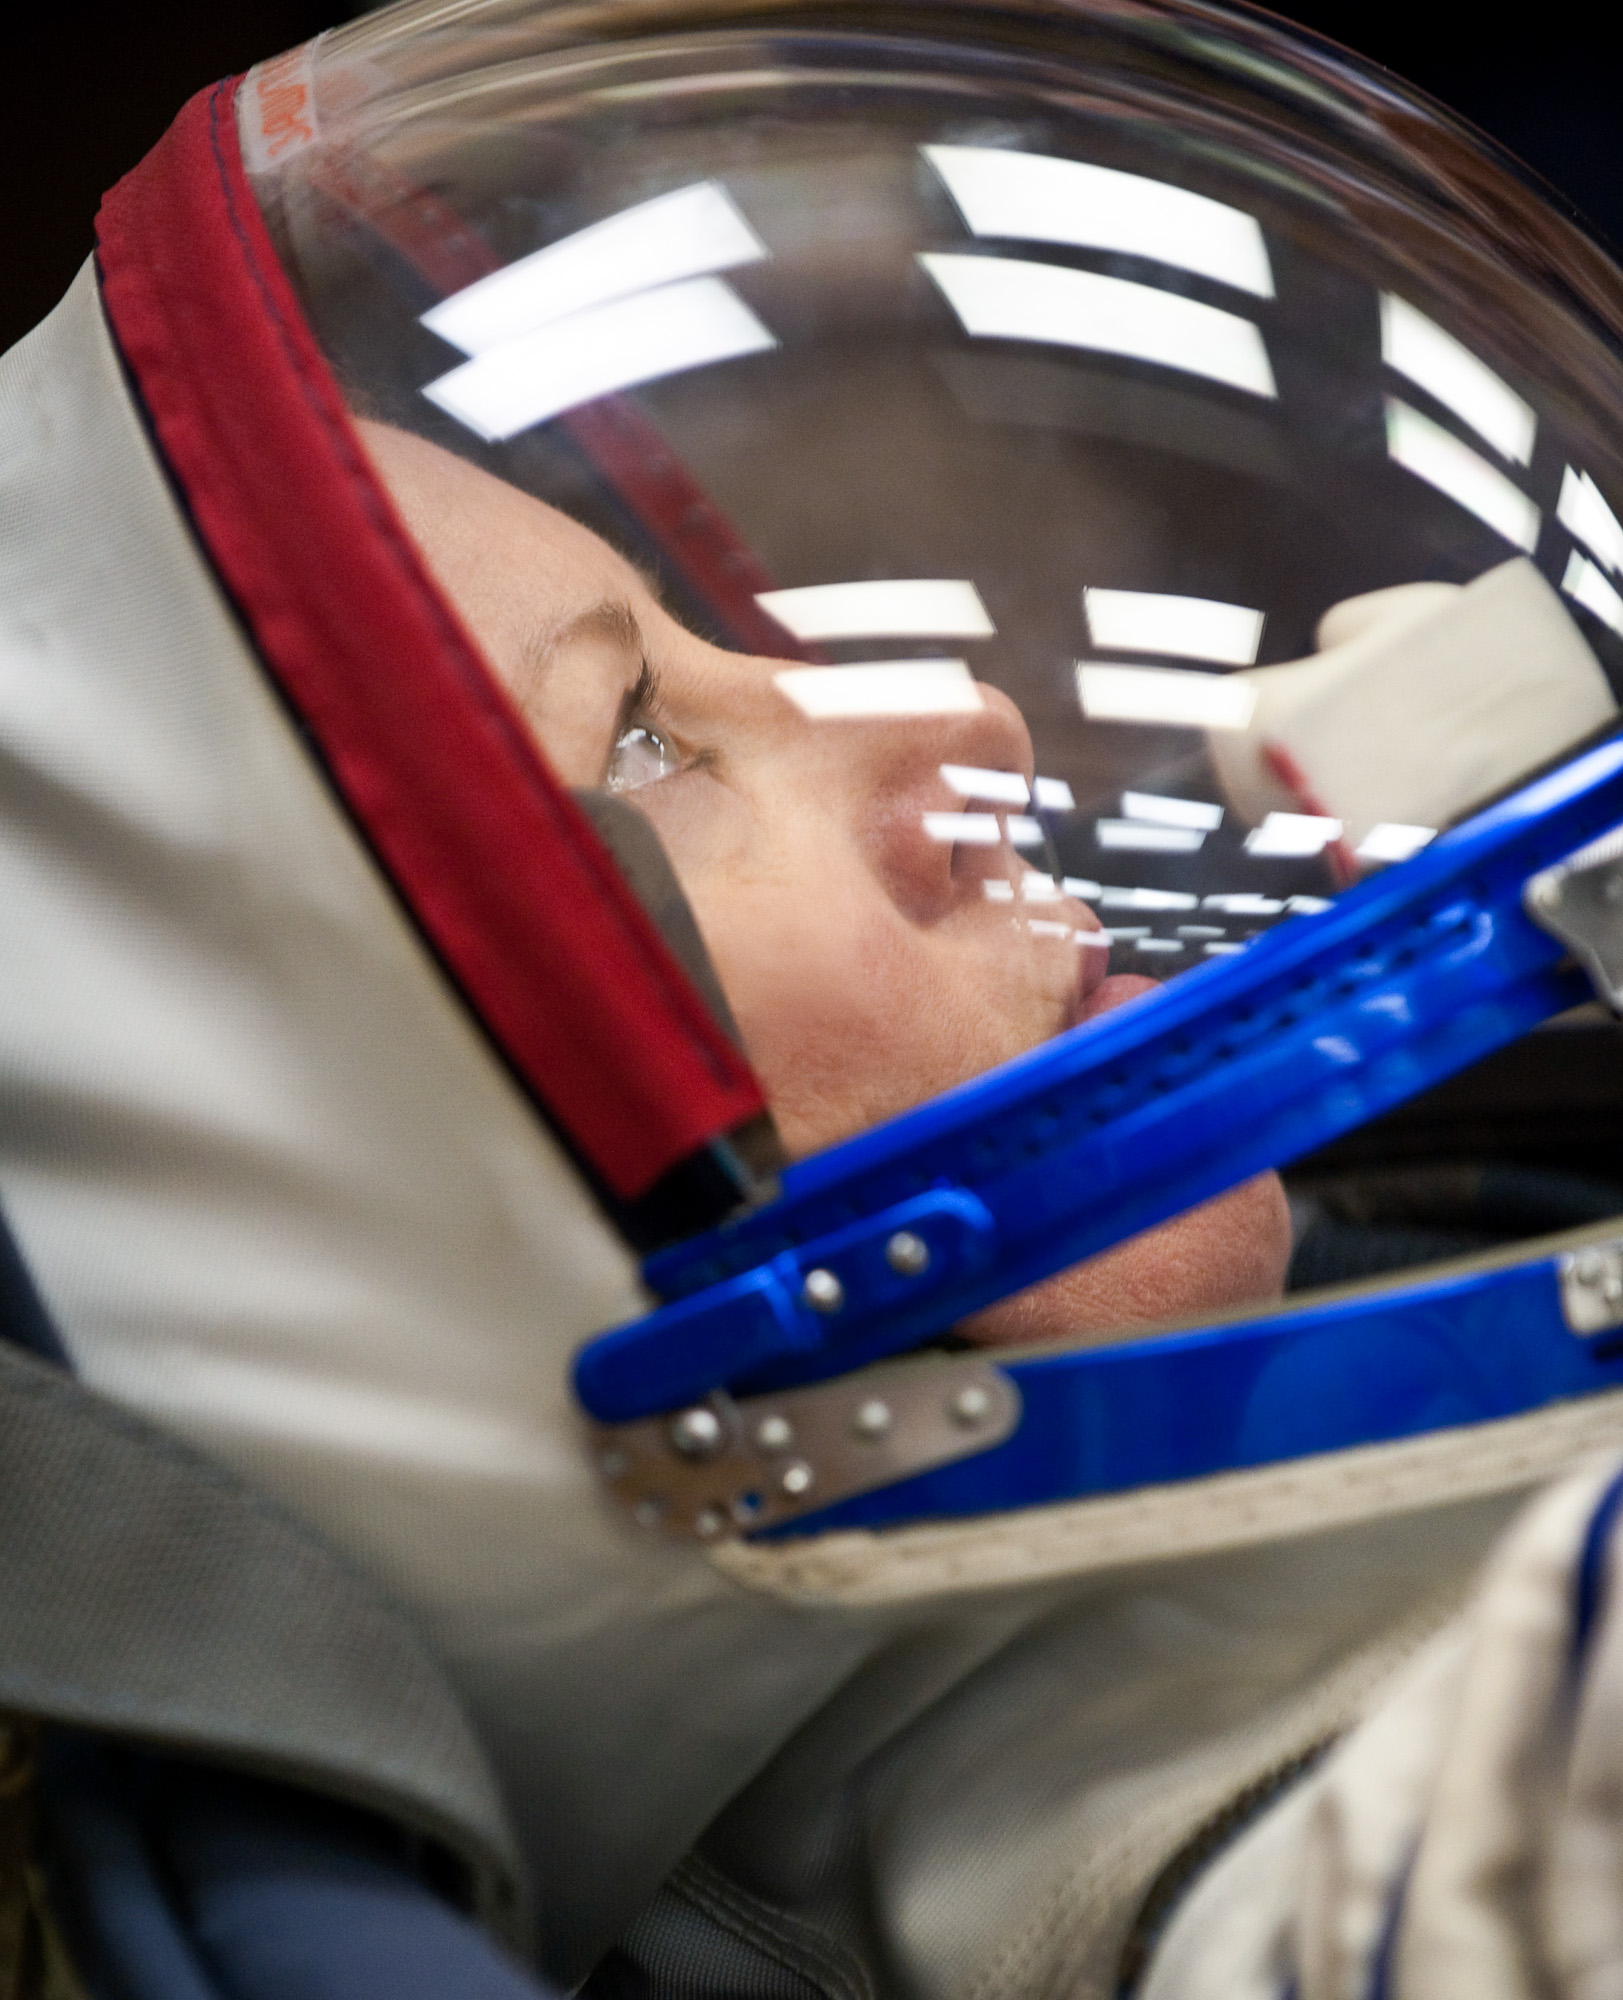  Expedition 23 NASA Flight Engineer Tracy Caldwell Dyson of the U.S. prepares to have her Russian Sokol suit pressure checked at the Baikonur Cosmodrome in Baikonur, Kazakhstan, Friday, April 2, 2010. Caldwell Dyson and fellow Expedition 23 crewmembe